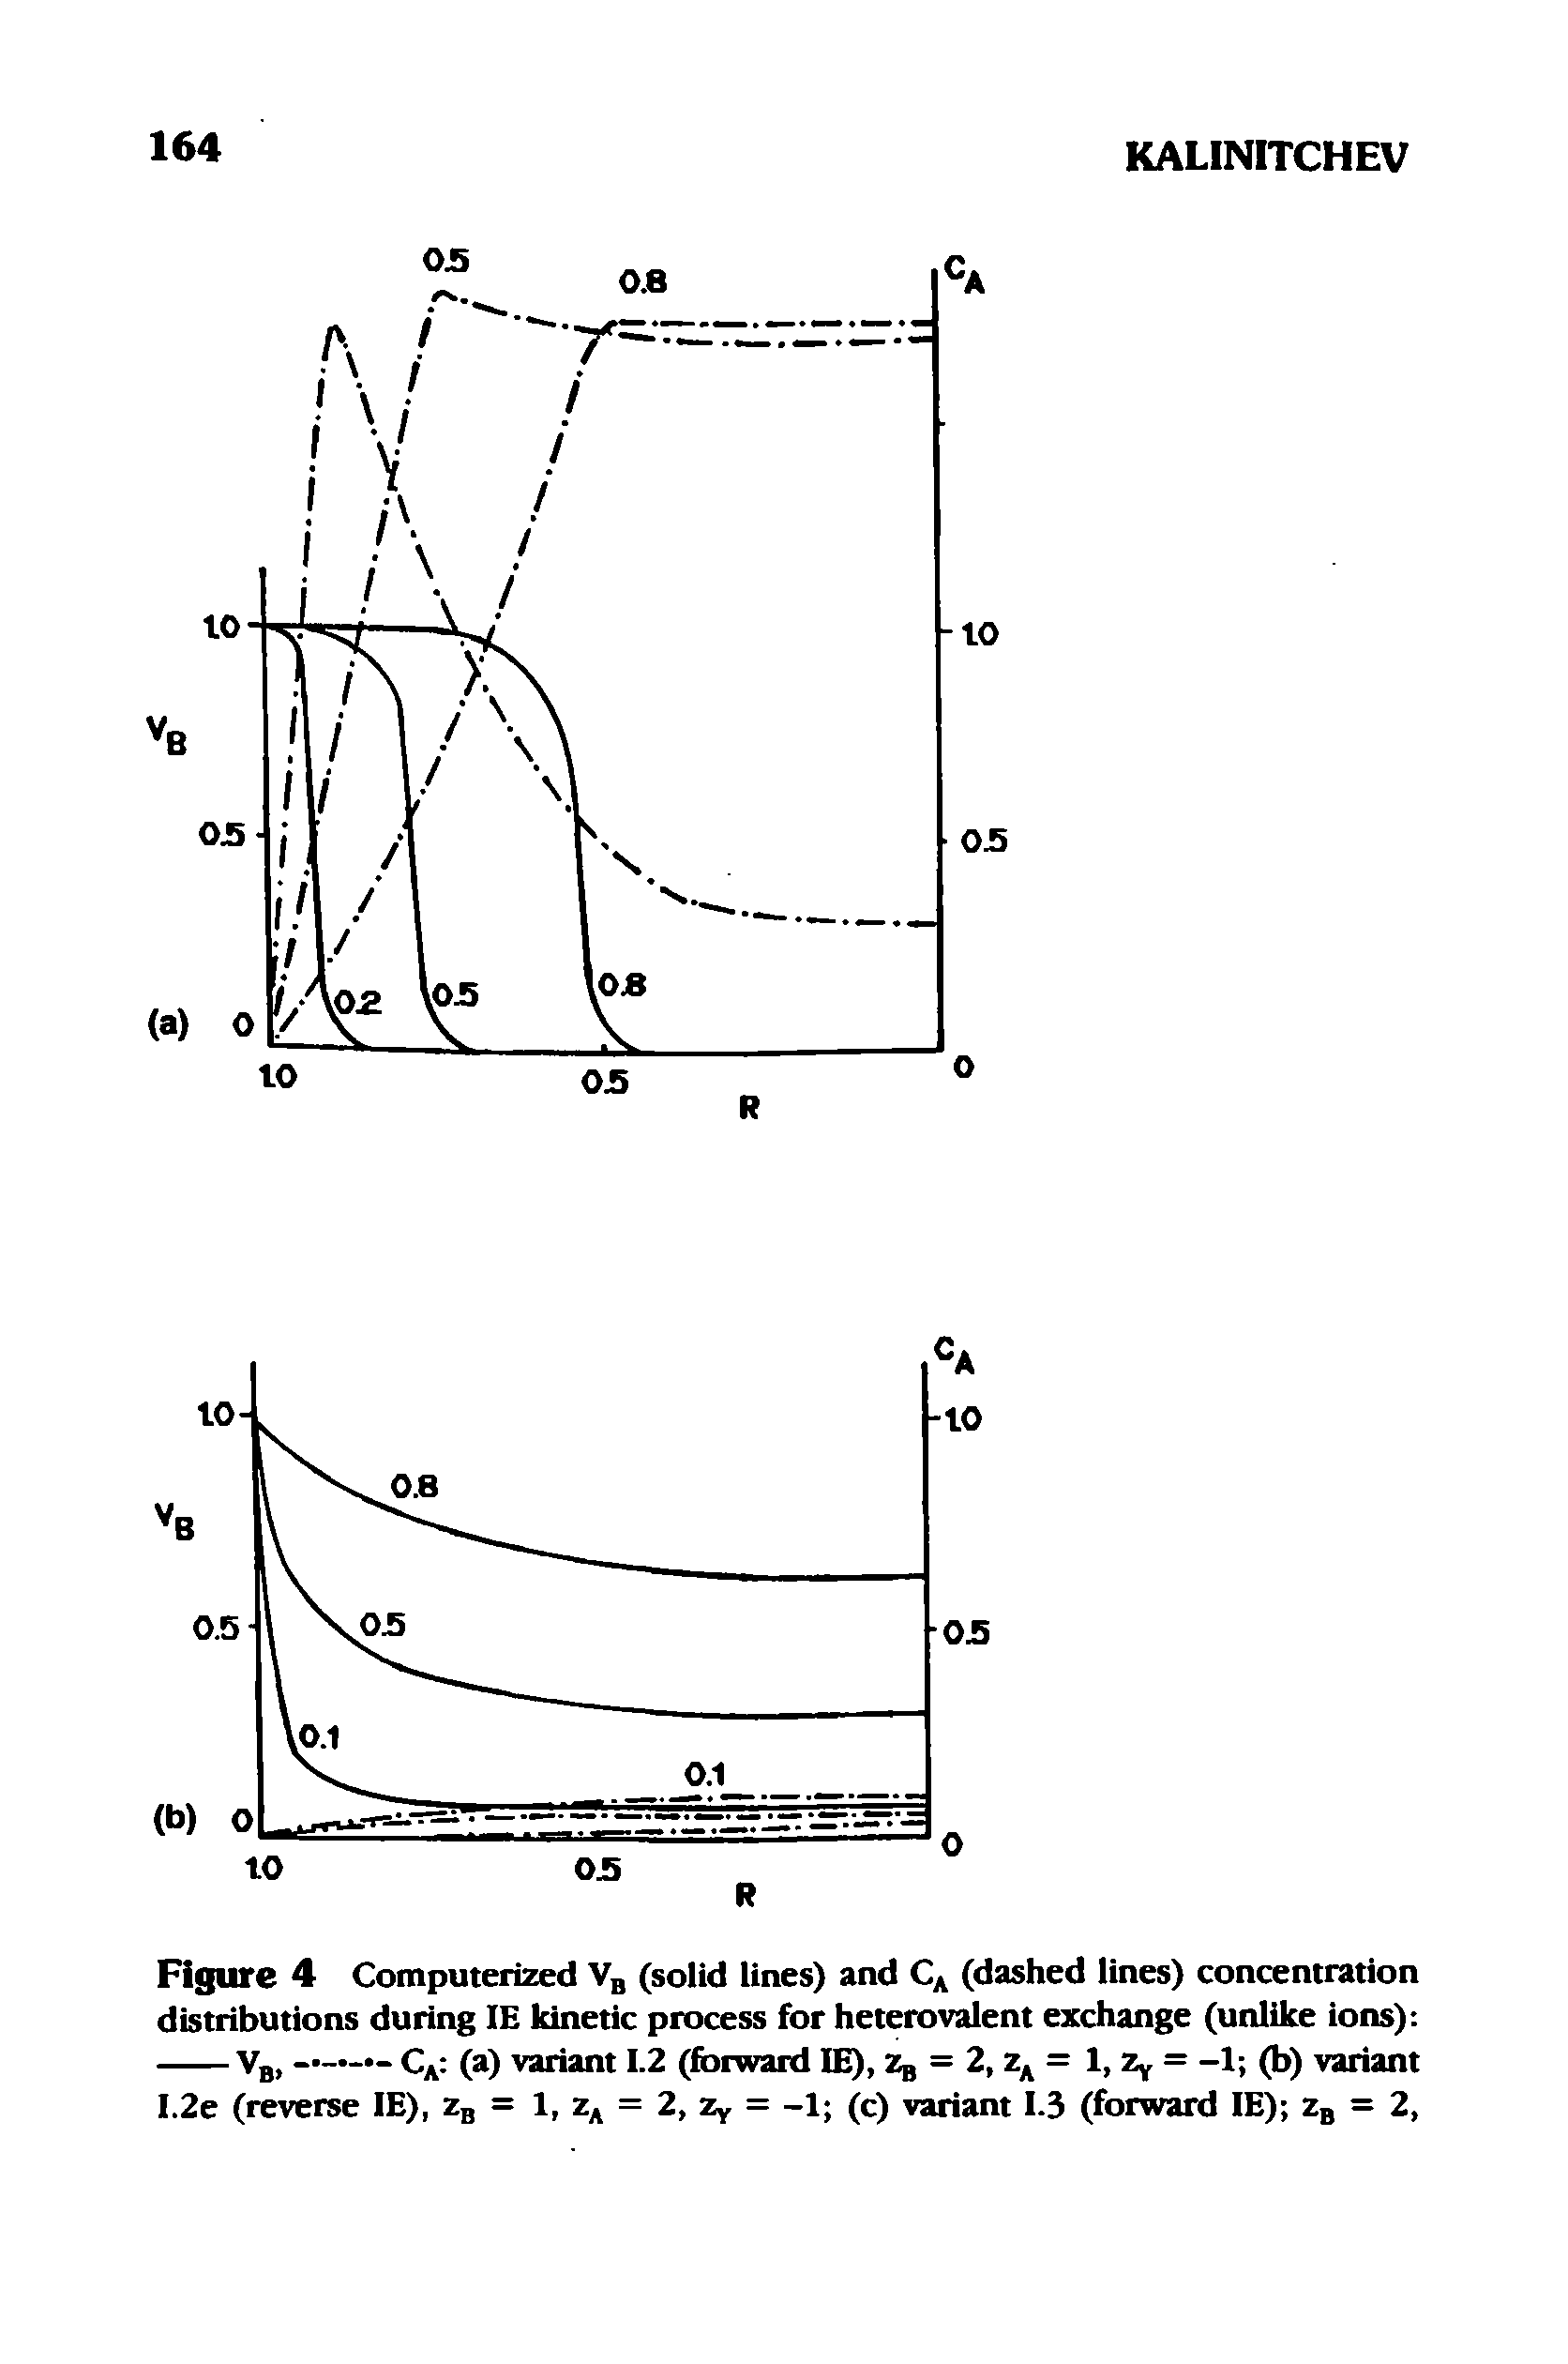 Figure 4 Computerized V3 (solid lines) and C (dashed lines) concentration distributions during IE kinetic process for heterovalent exchange (unlike ions) ...